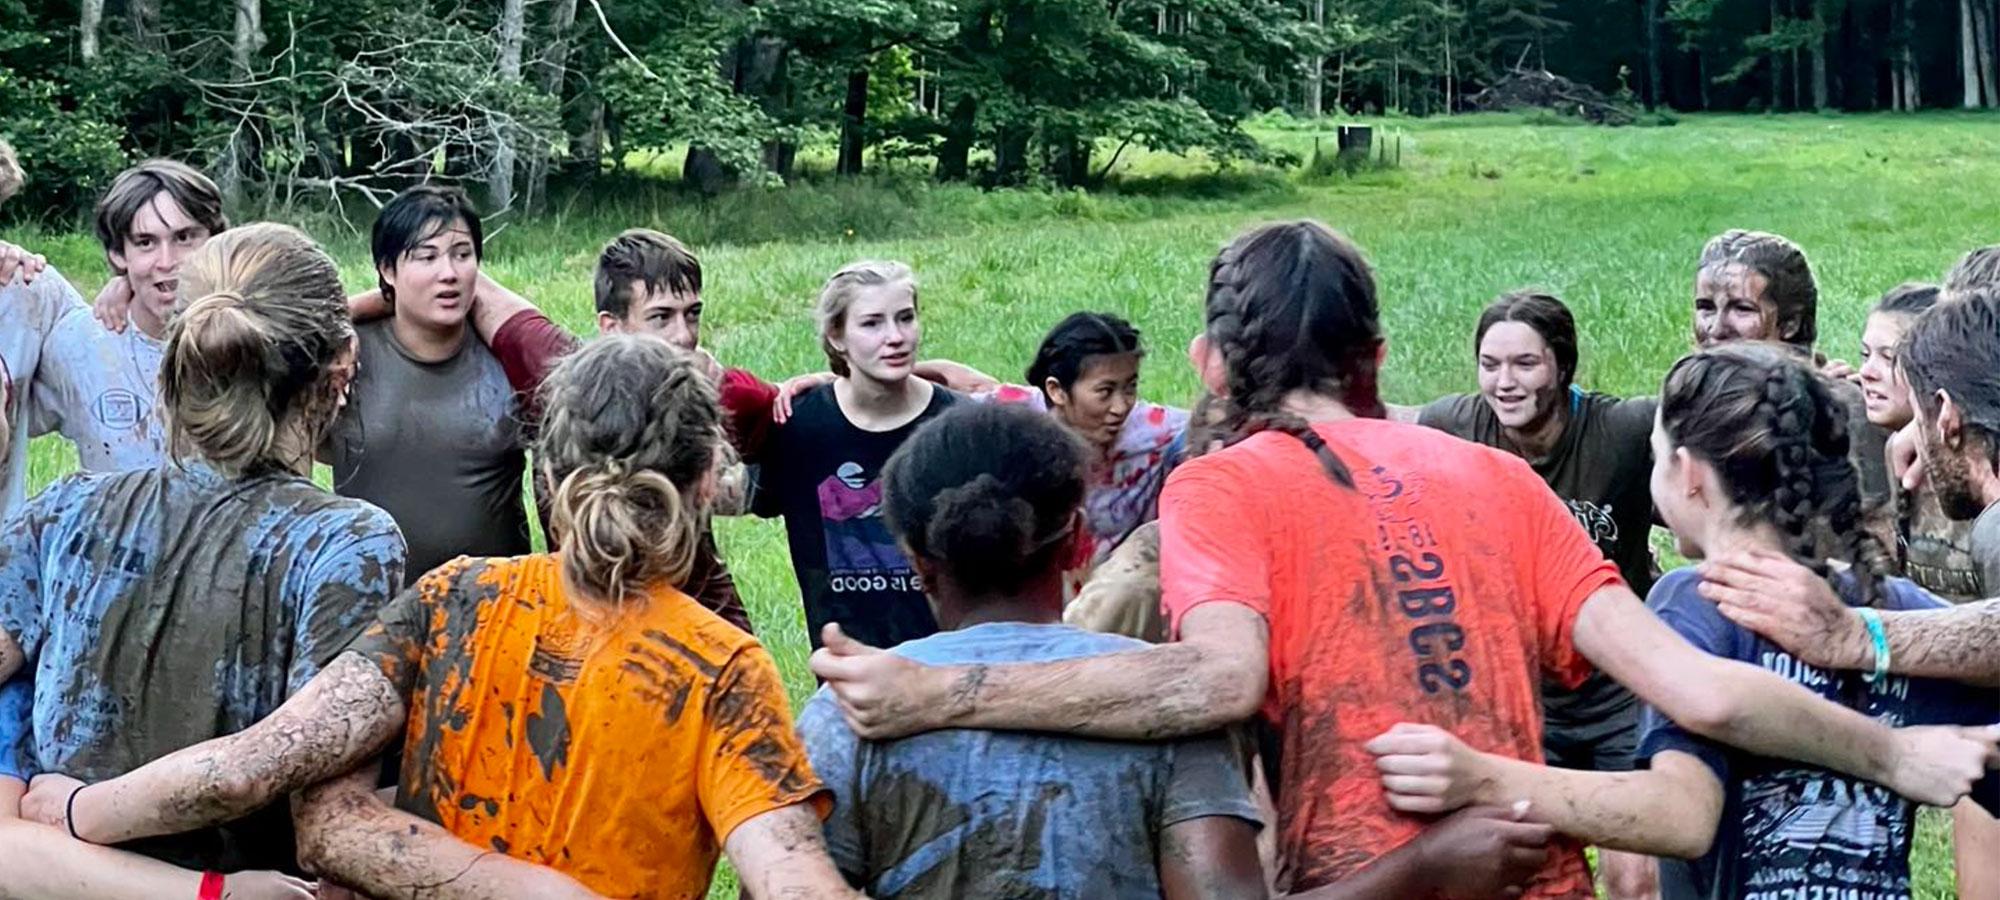 Students hugging in a circle after the mud run